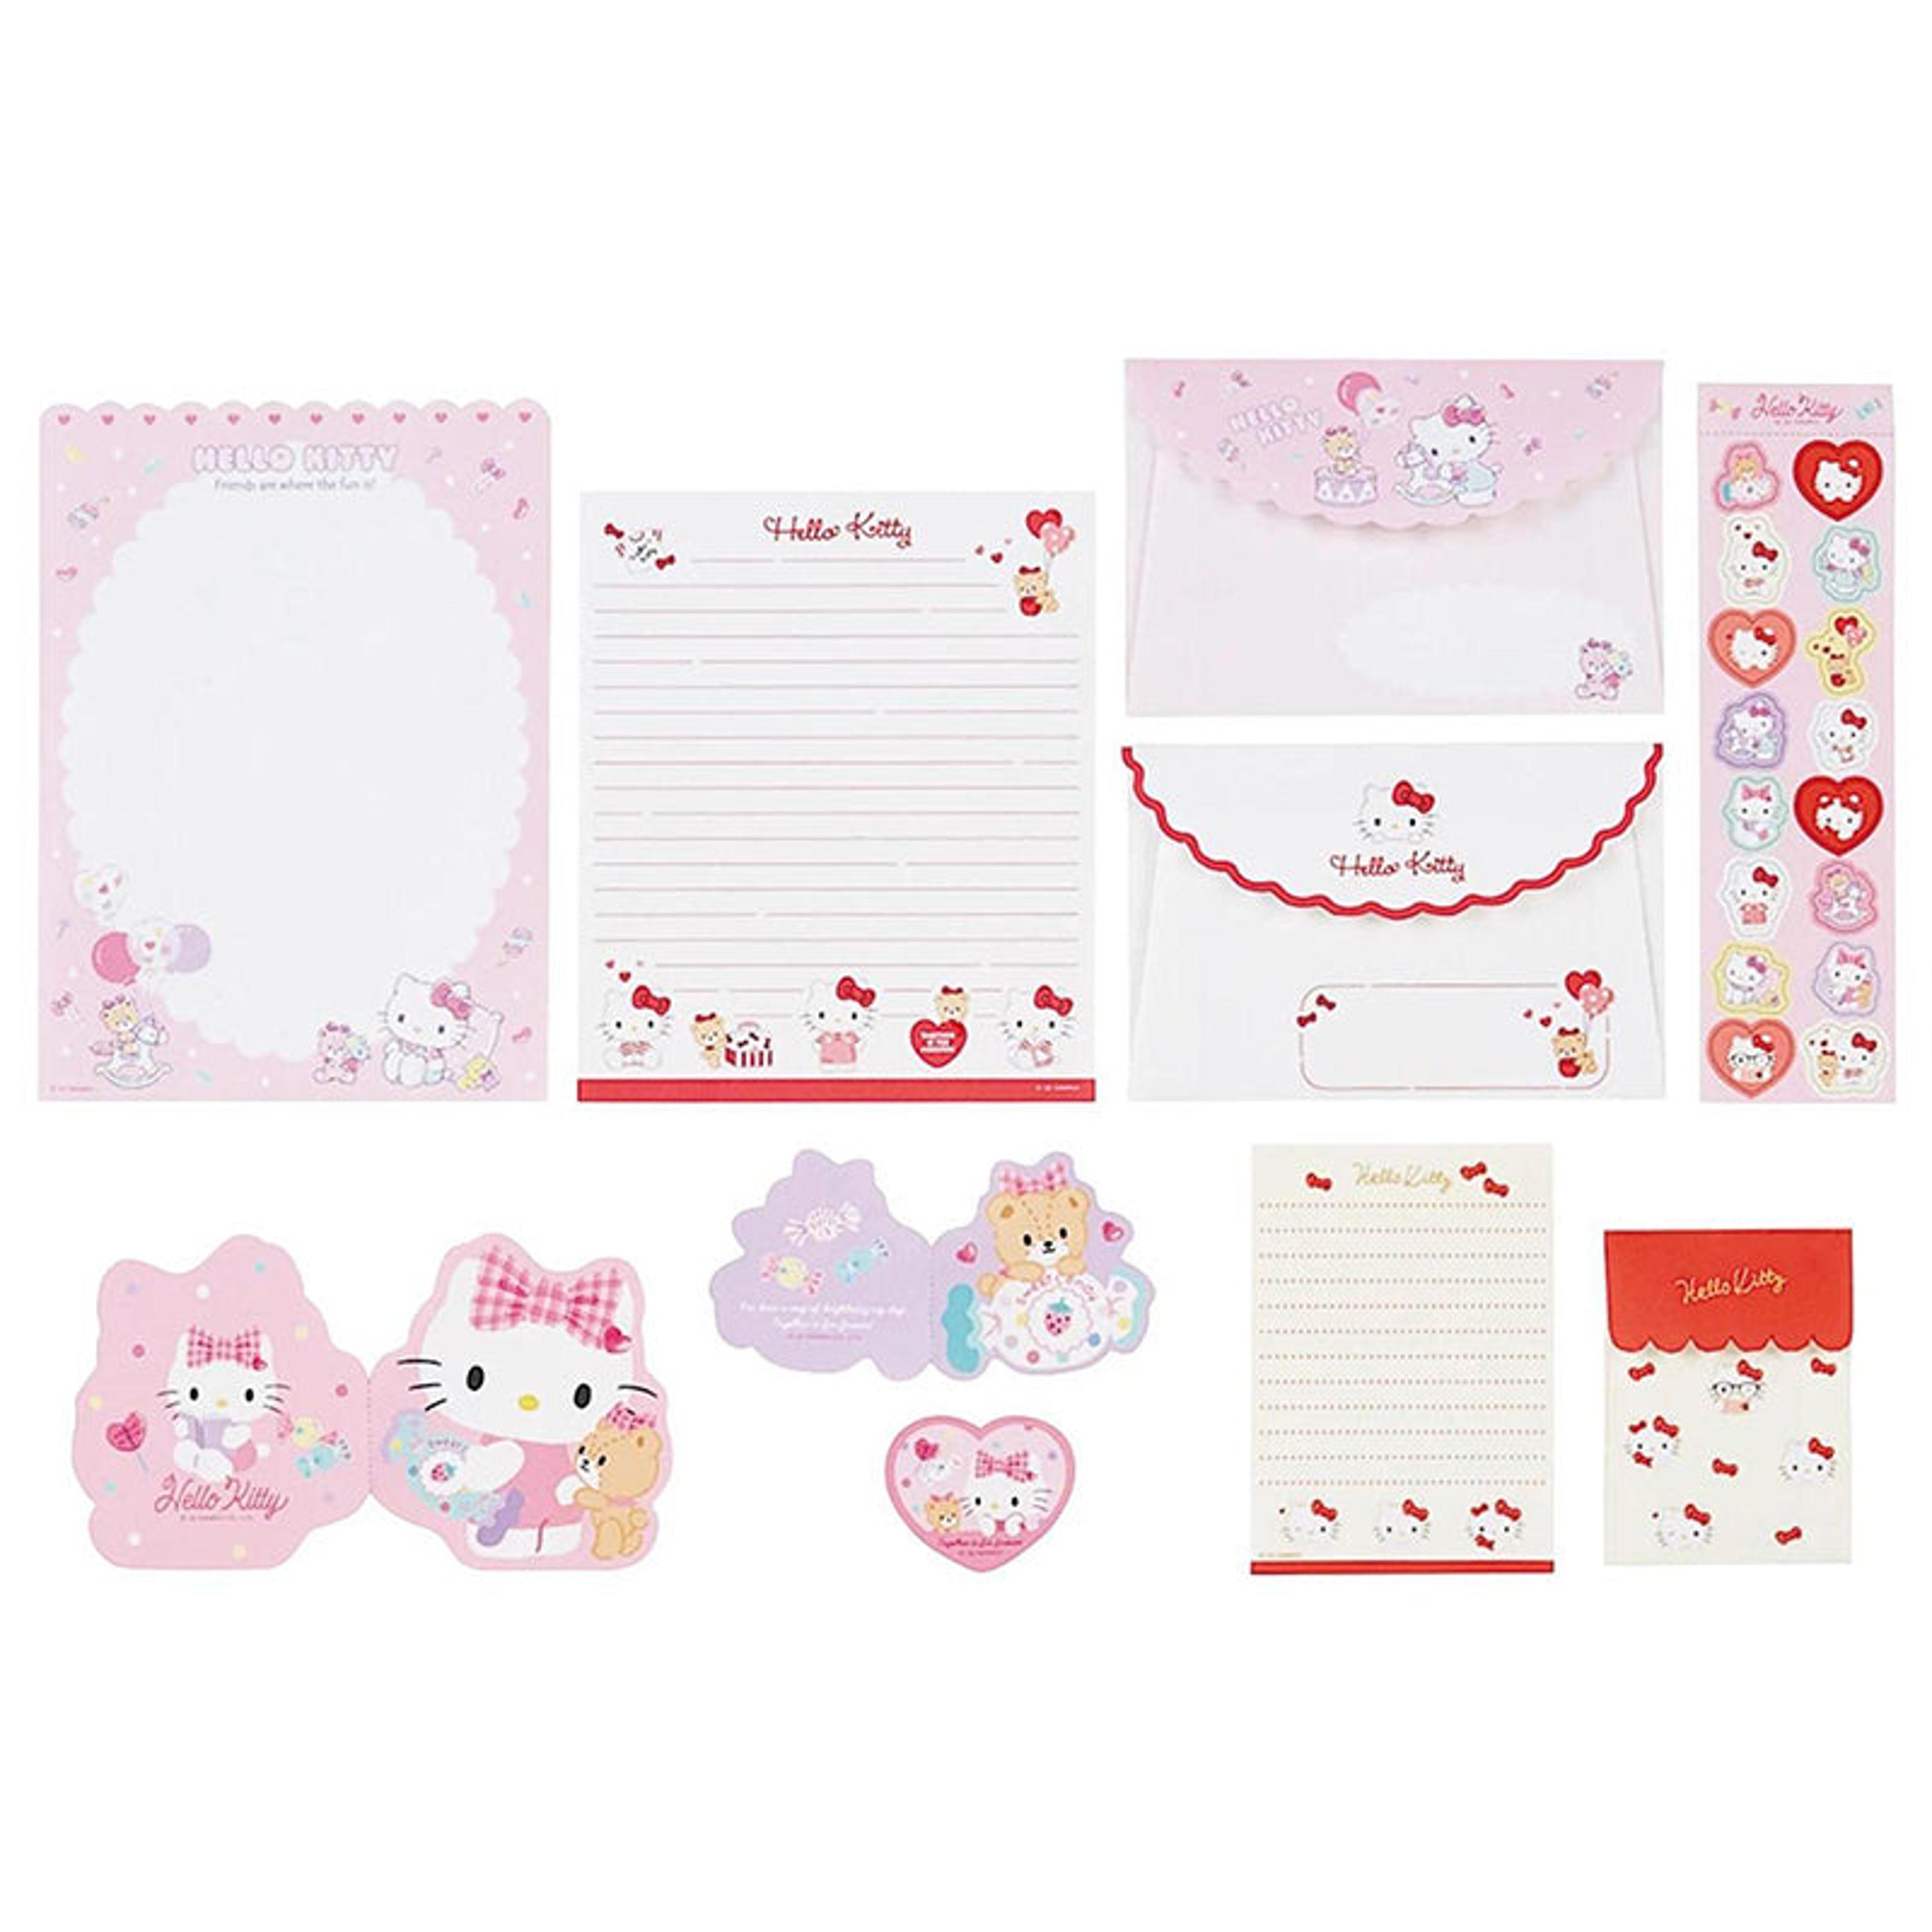 Alternate View 4 of Sanrio Character Variety Letter Set